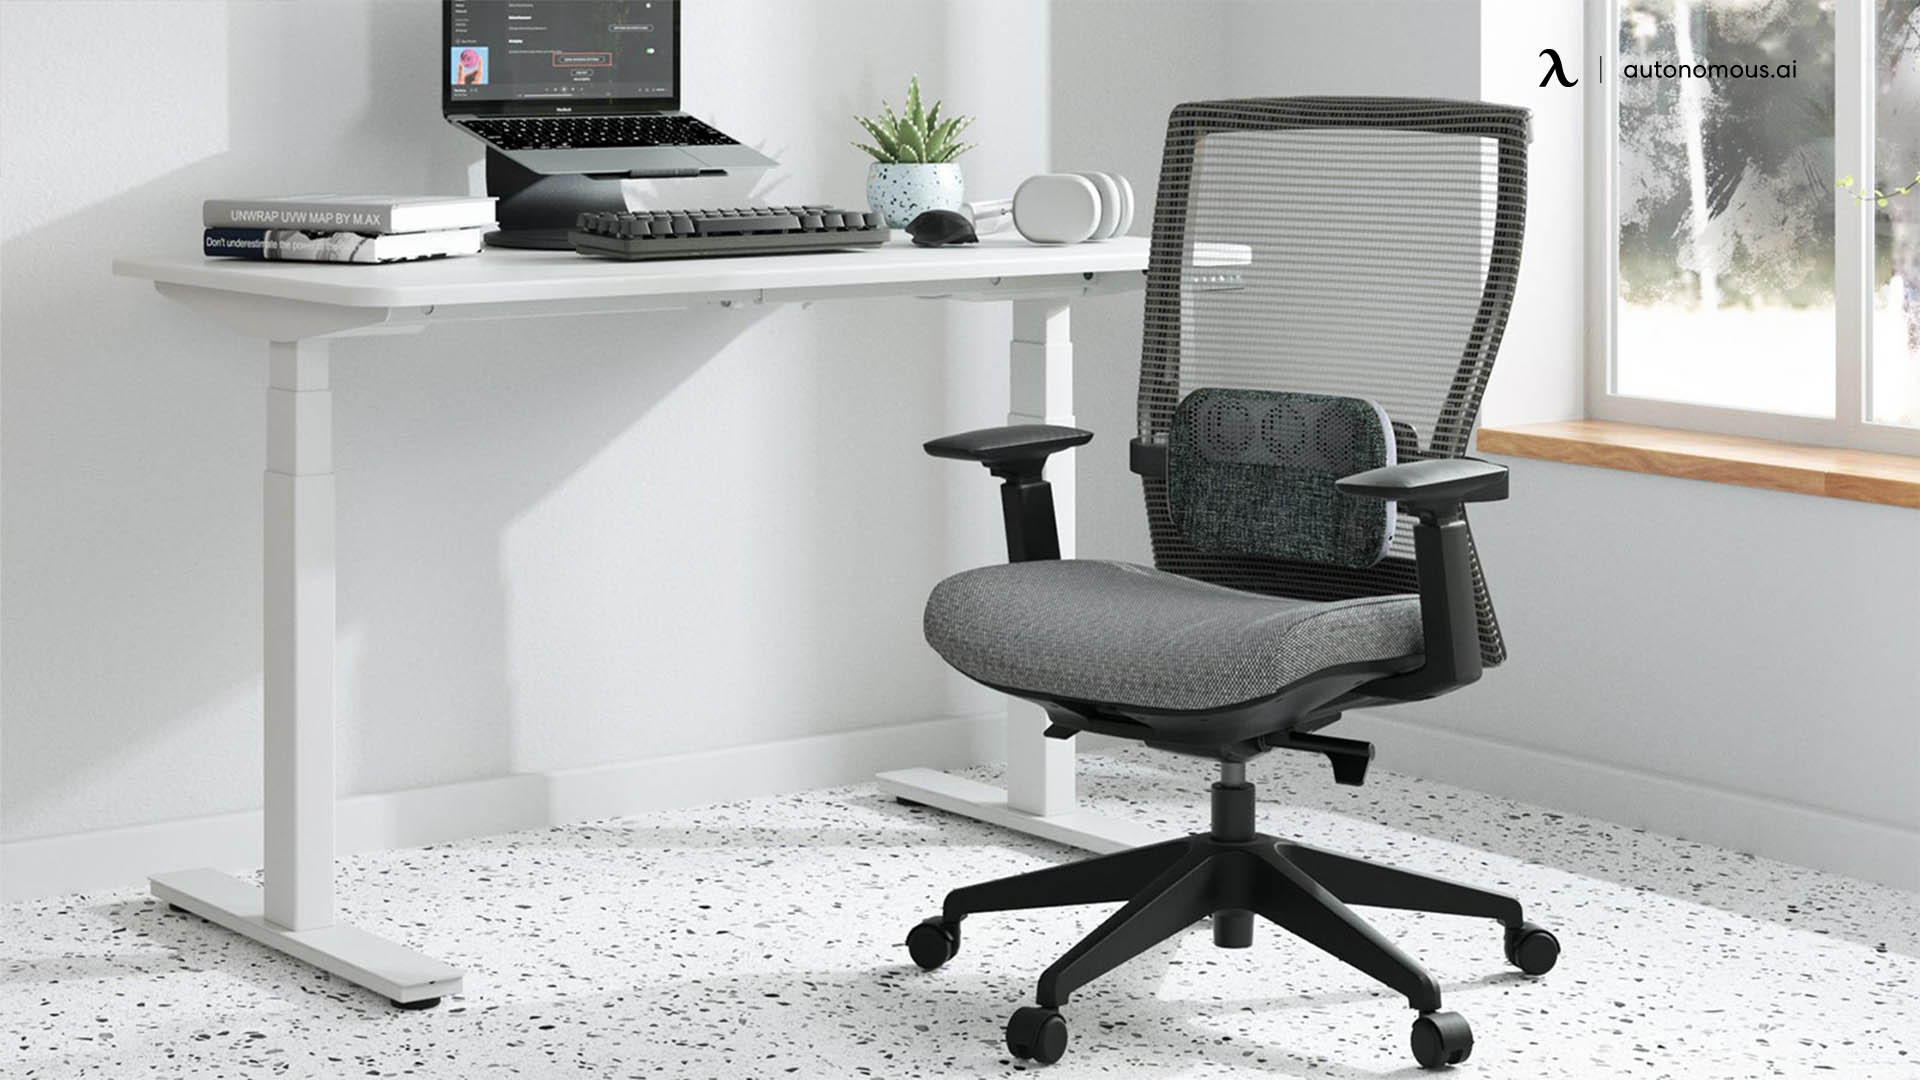 Set up your office to be ergonomic